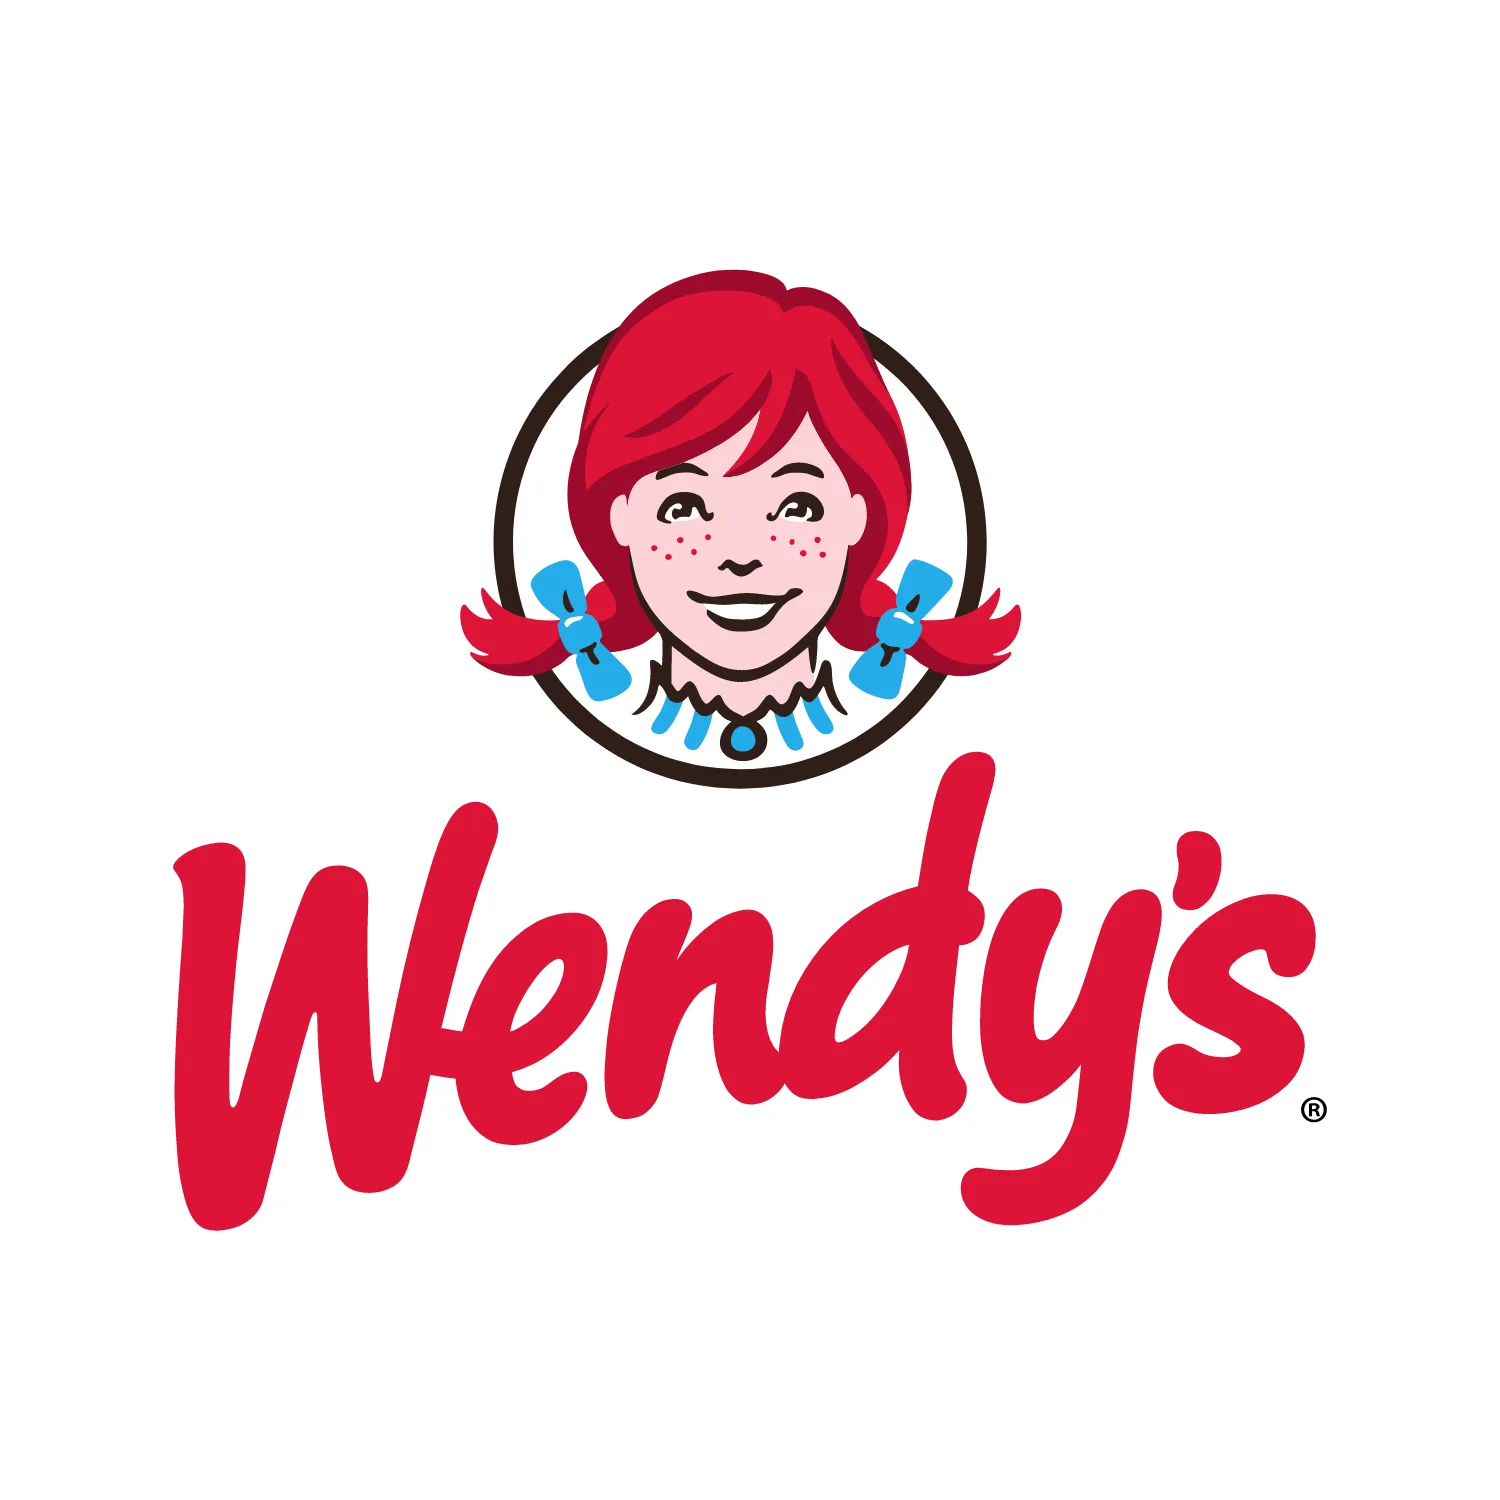 Database of Wendy’s Locations in the United States